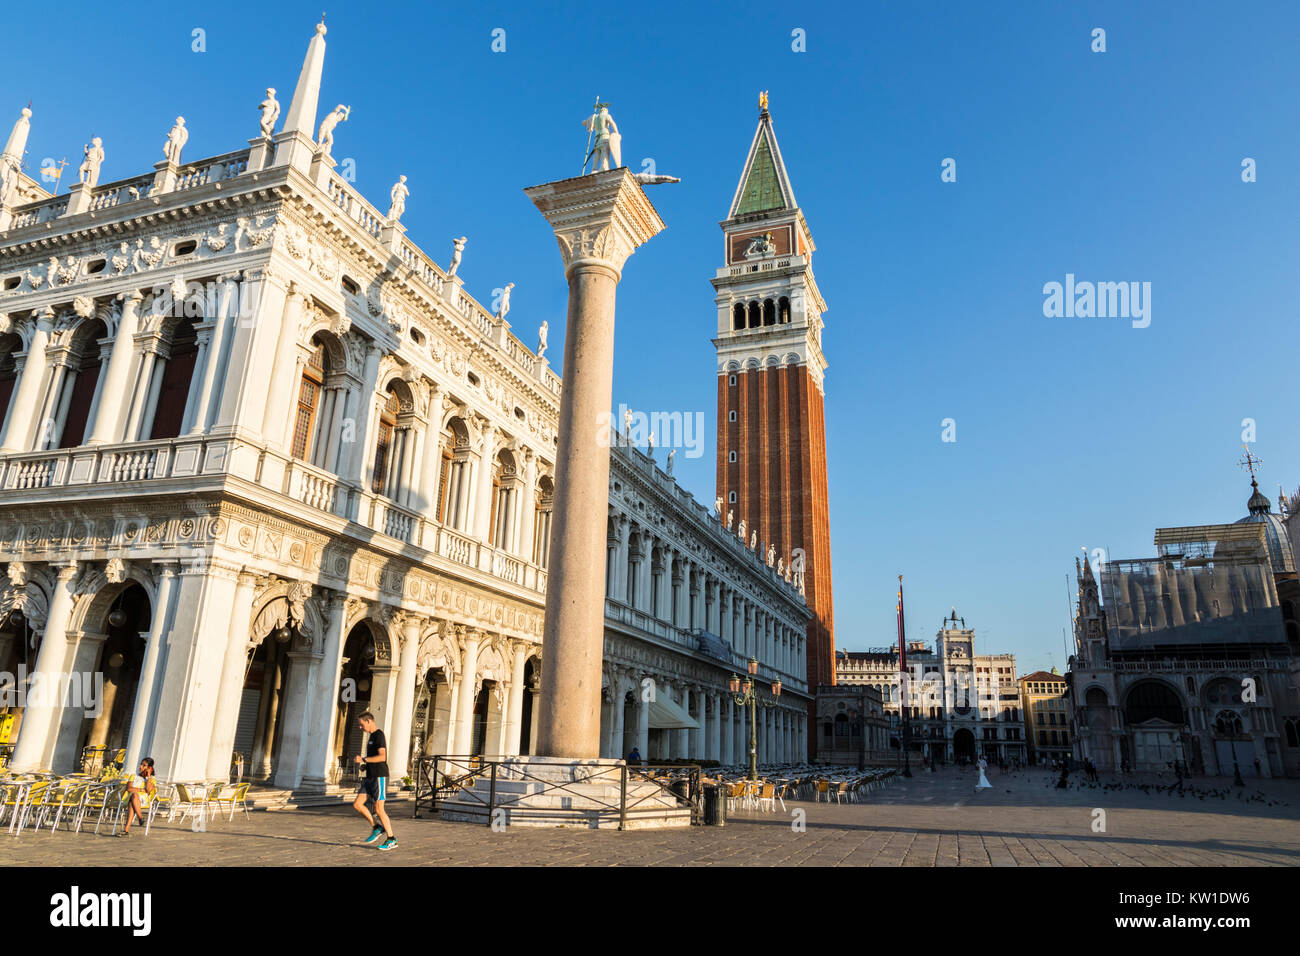 Views of Venice, Italy, with the Biblioteca Nazionale Marciana (National Library of St Mark's), the Campanile di San Marco (St Mark's Campanile) and t Stock Photo